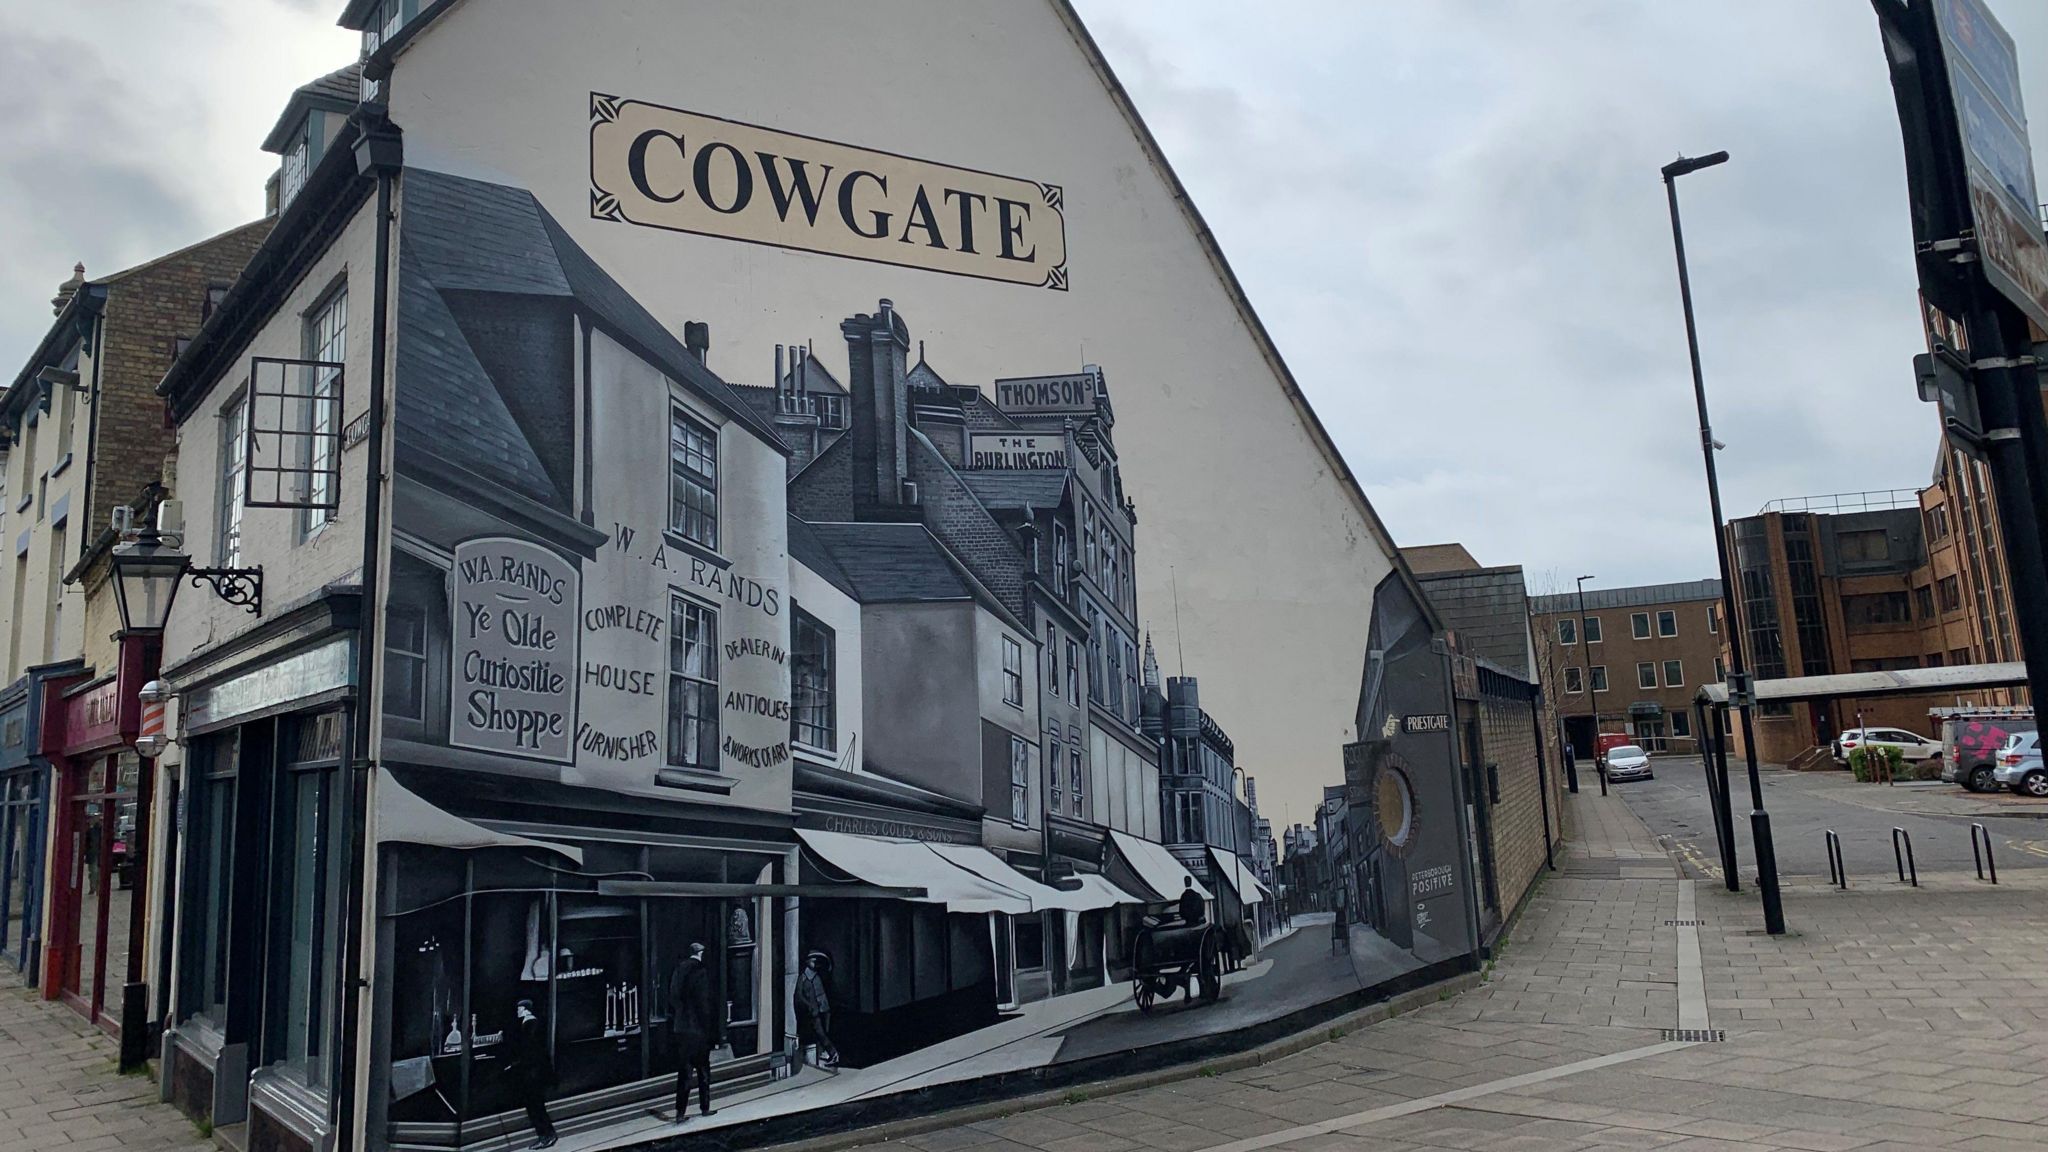 The historic Cowgate mural painted black and white